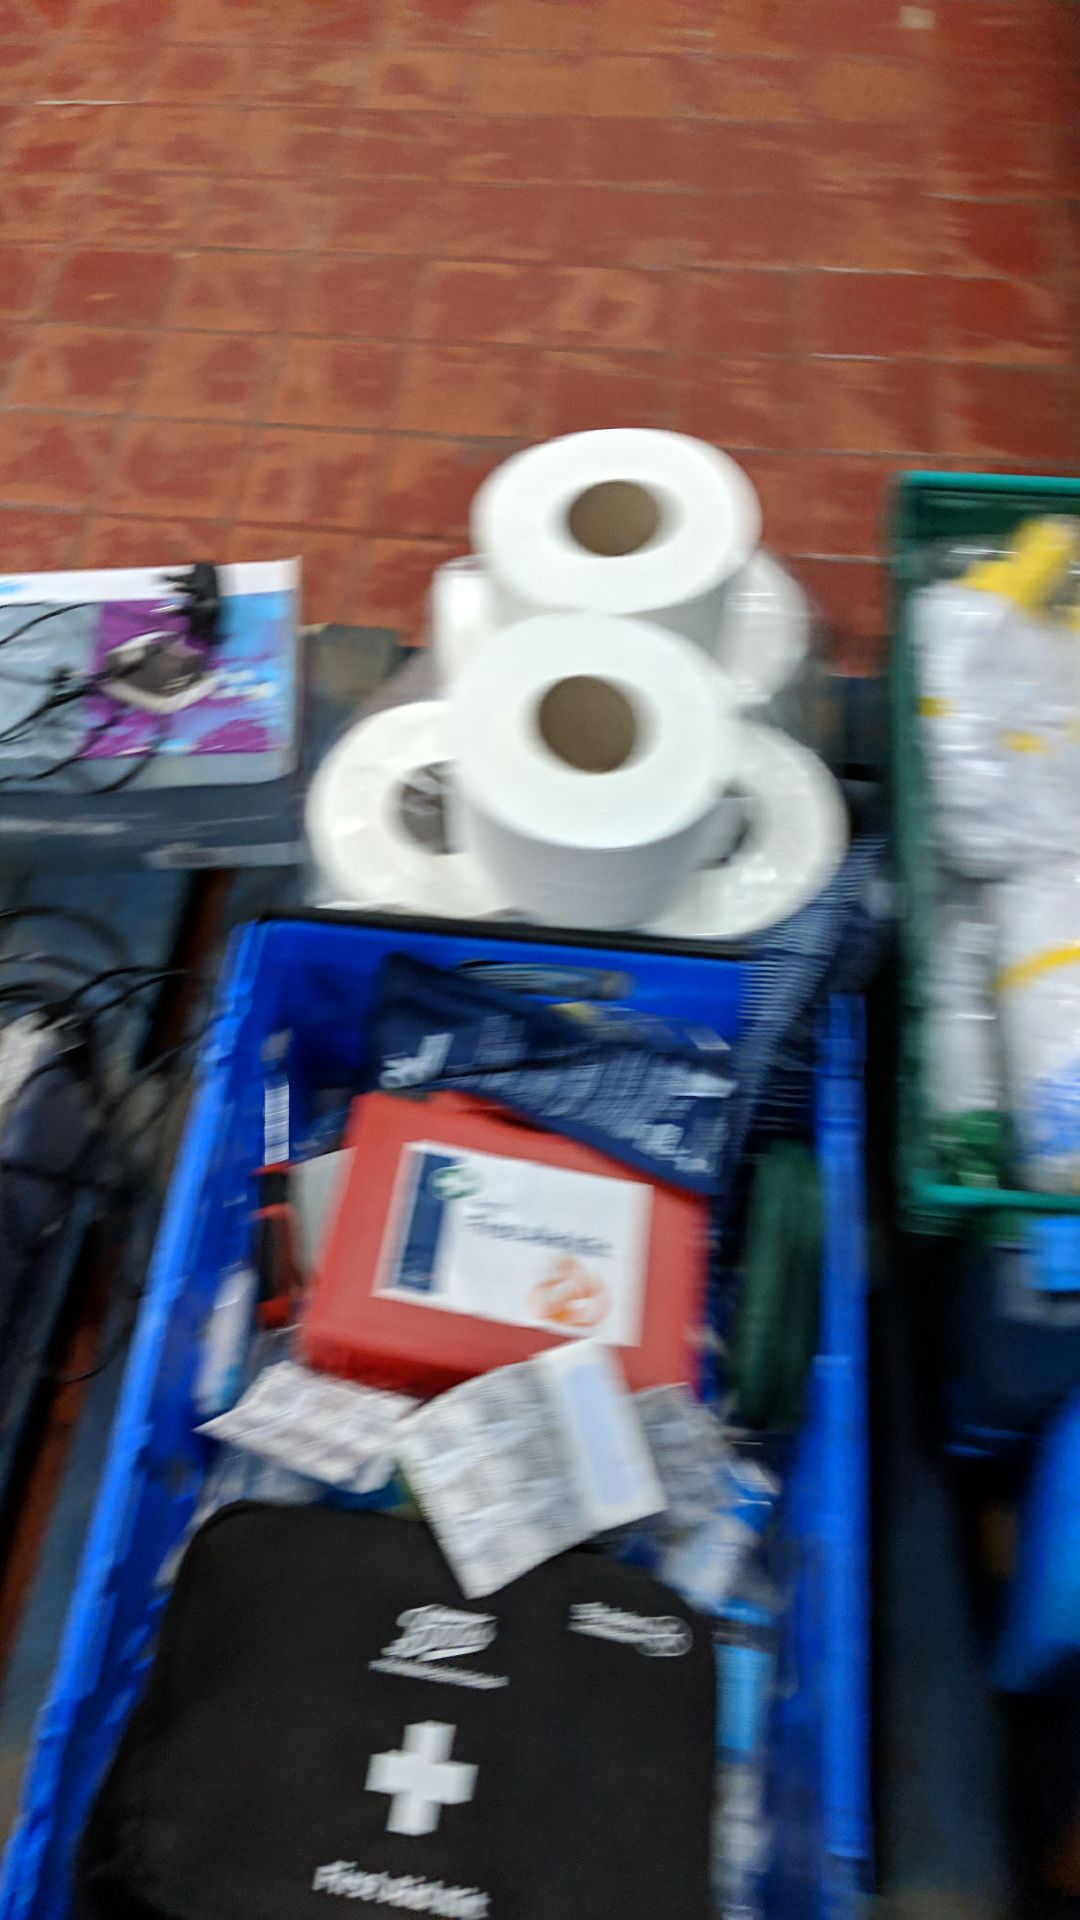 Double row of first aid equipment & cleaning consumables e.g. mop heads & rolls of toilet tissue - Bild 6 aus 9